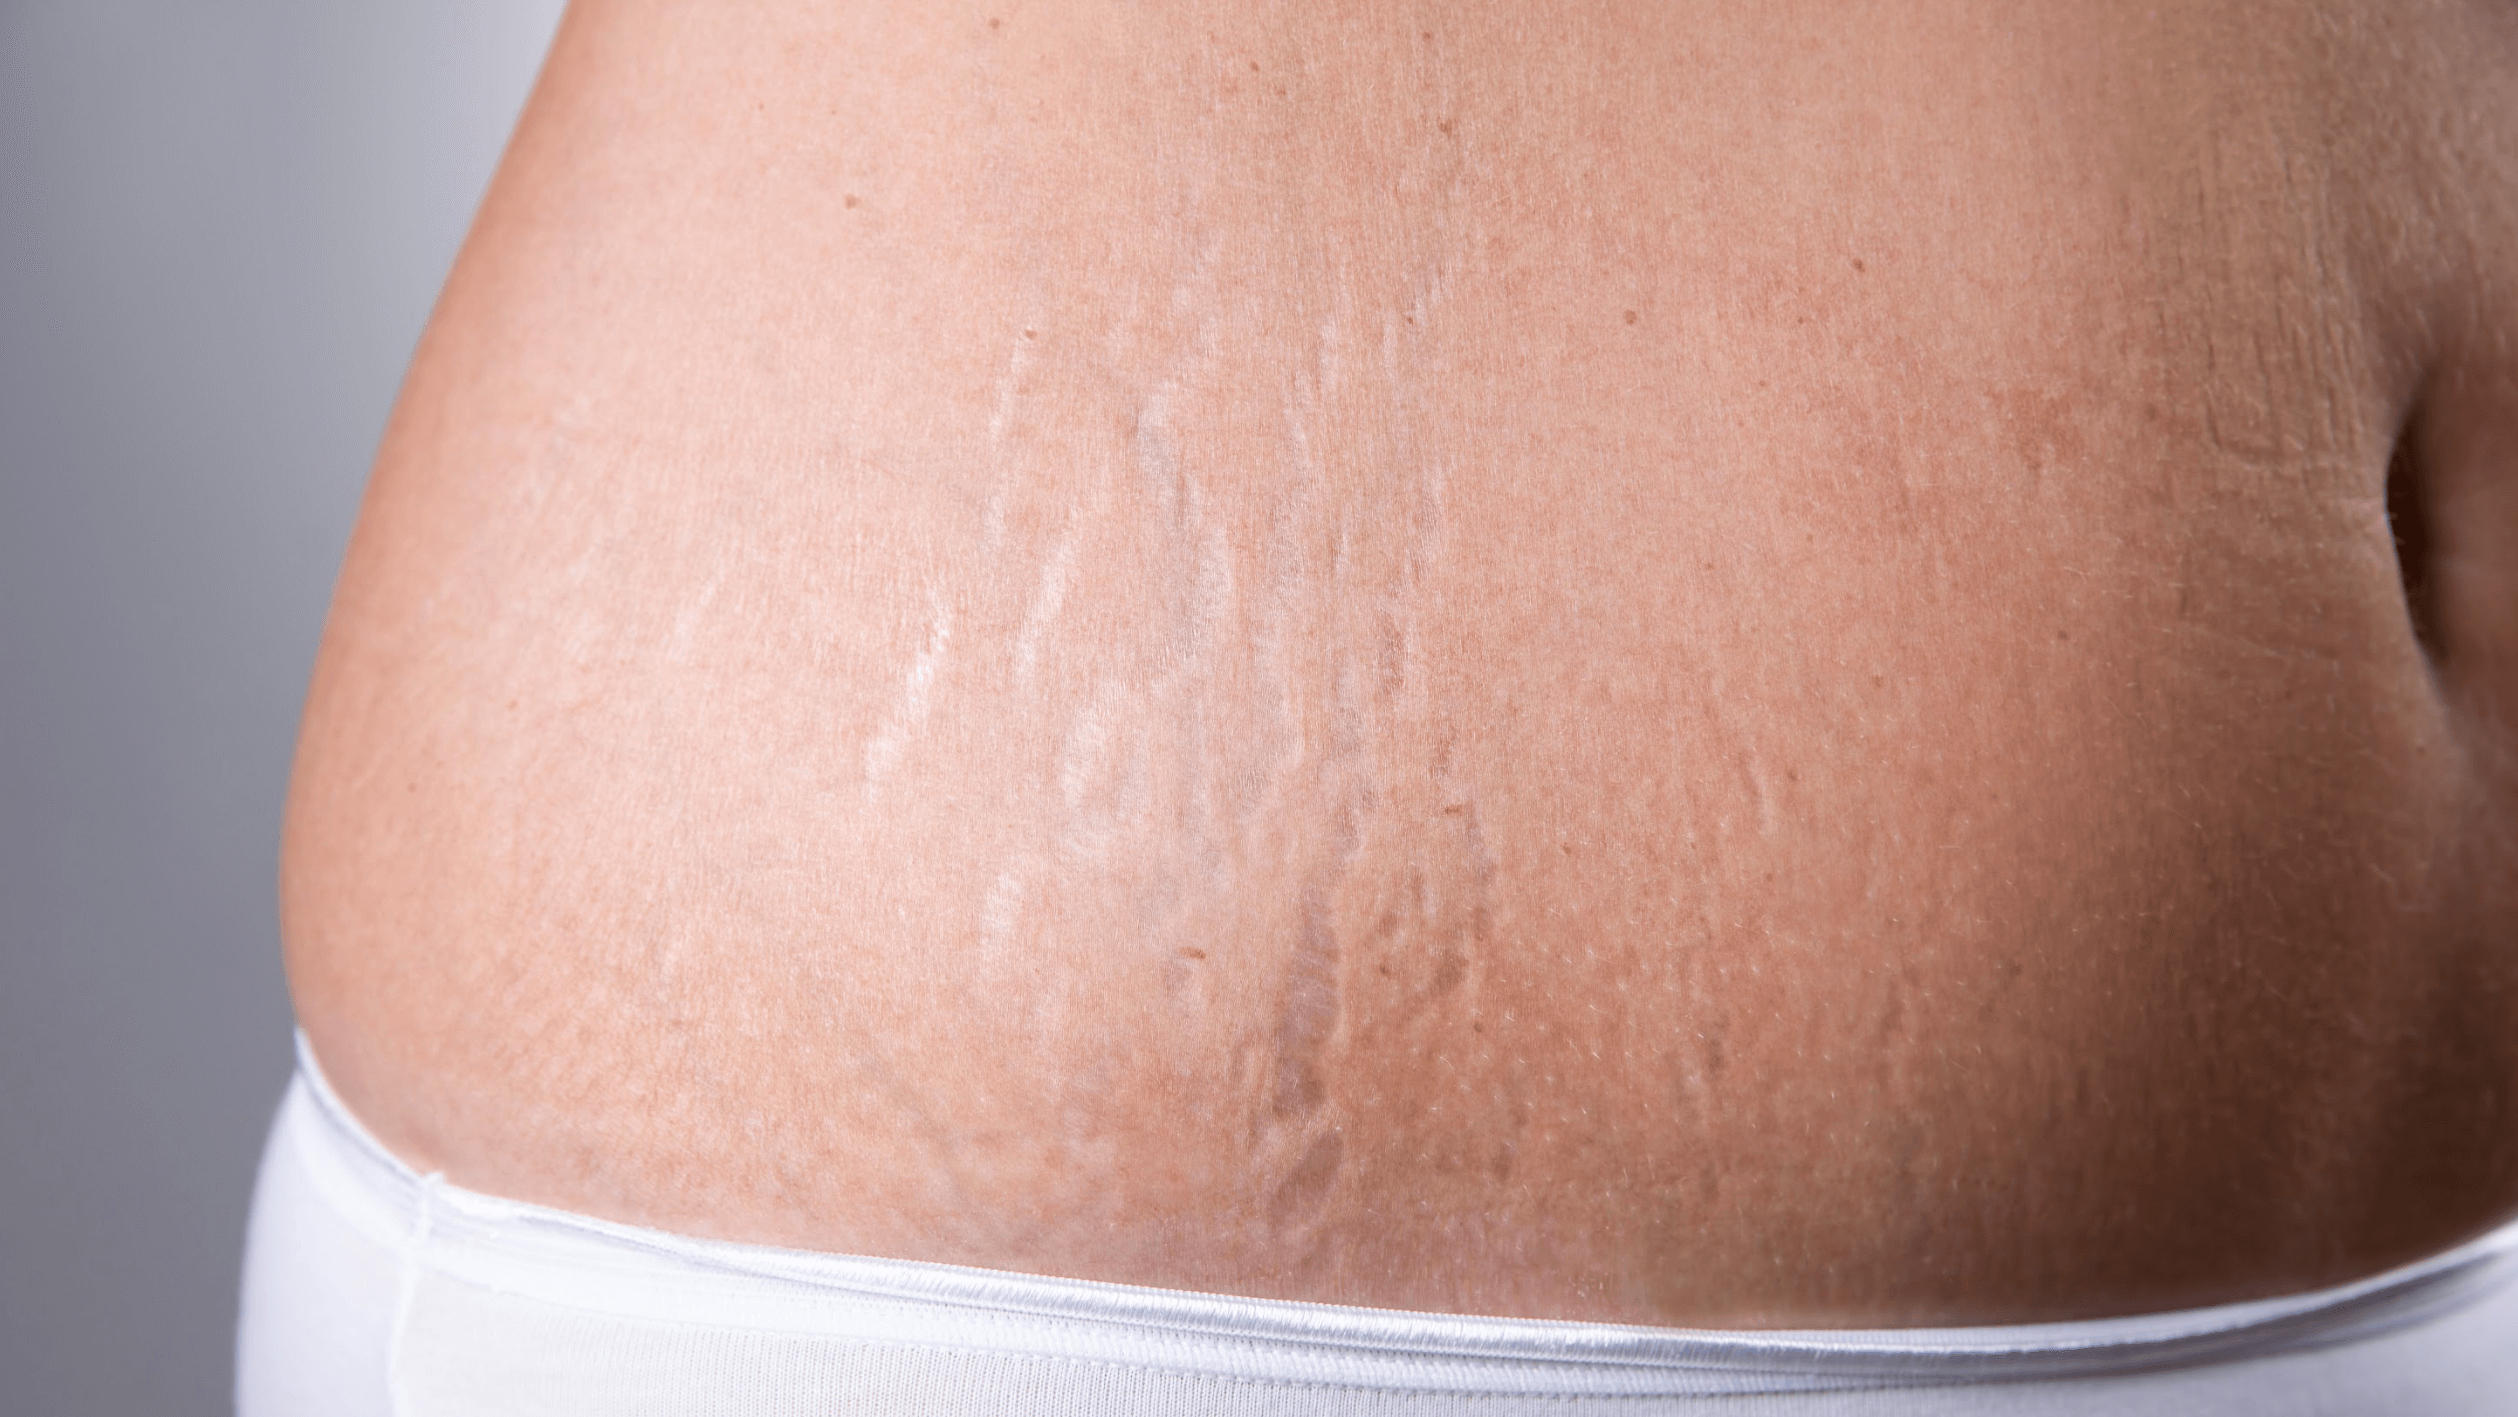 3 Ways to Get Rid of Stretch Marks Fast - wikiHow